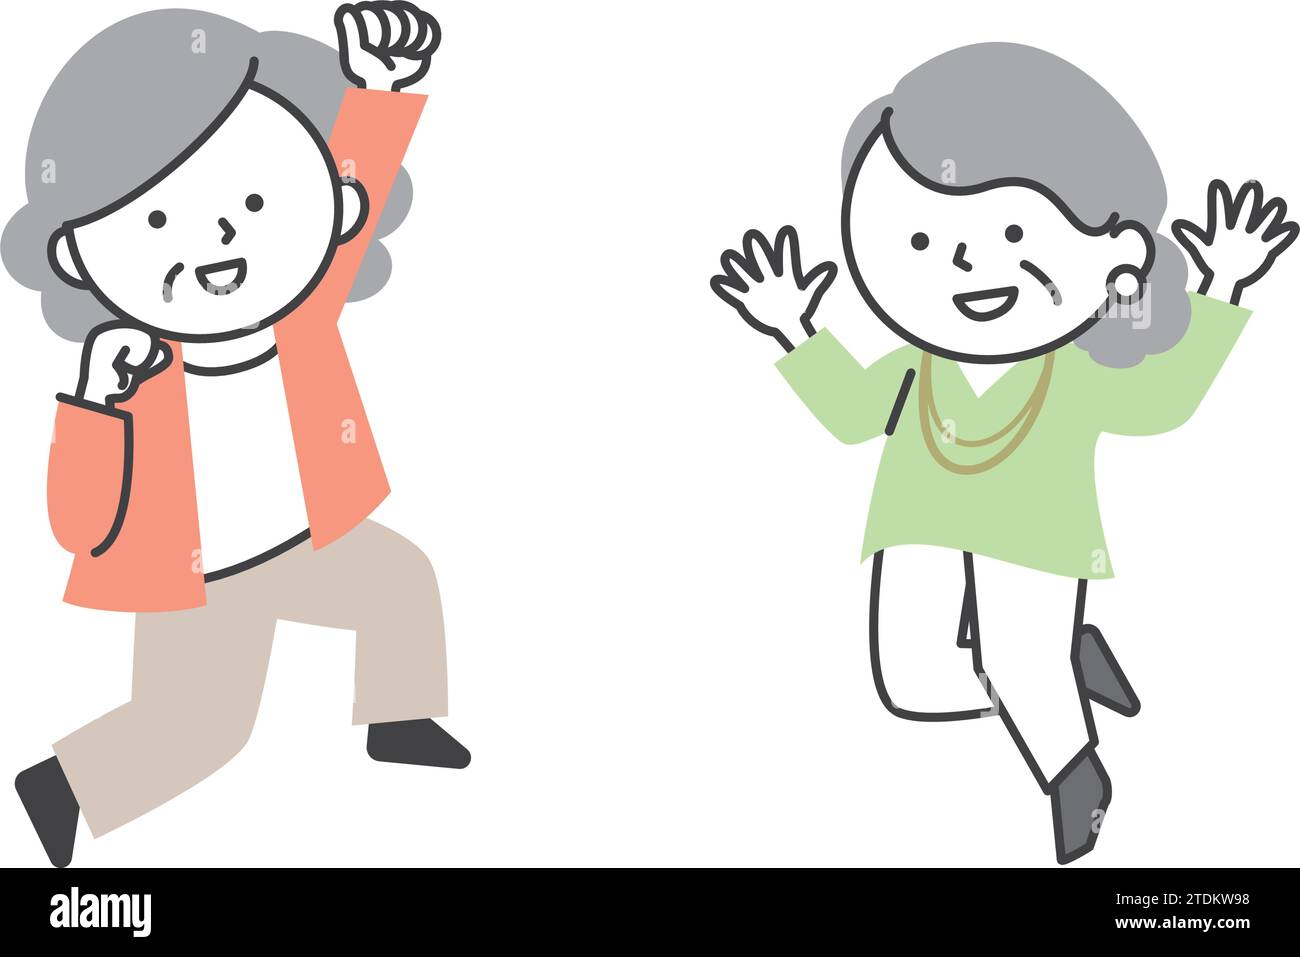 Senior women jumping with smiles. A simple and cute cartoon-style ...